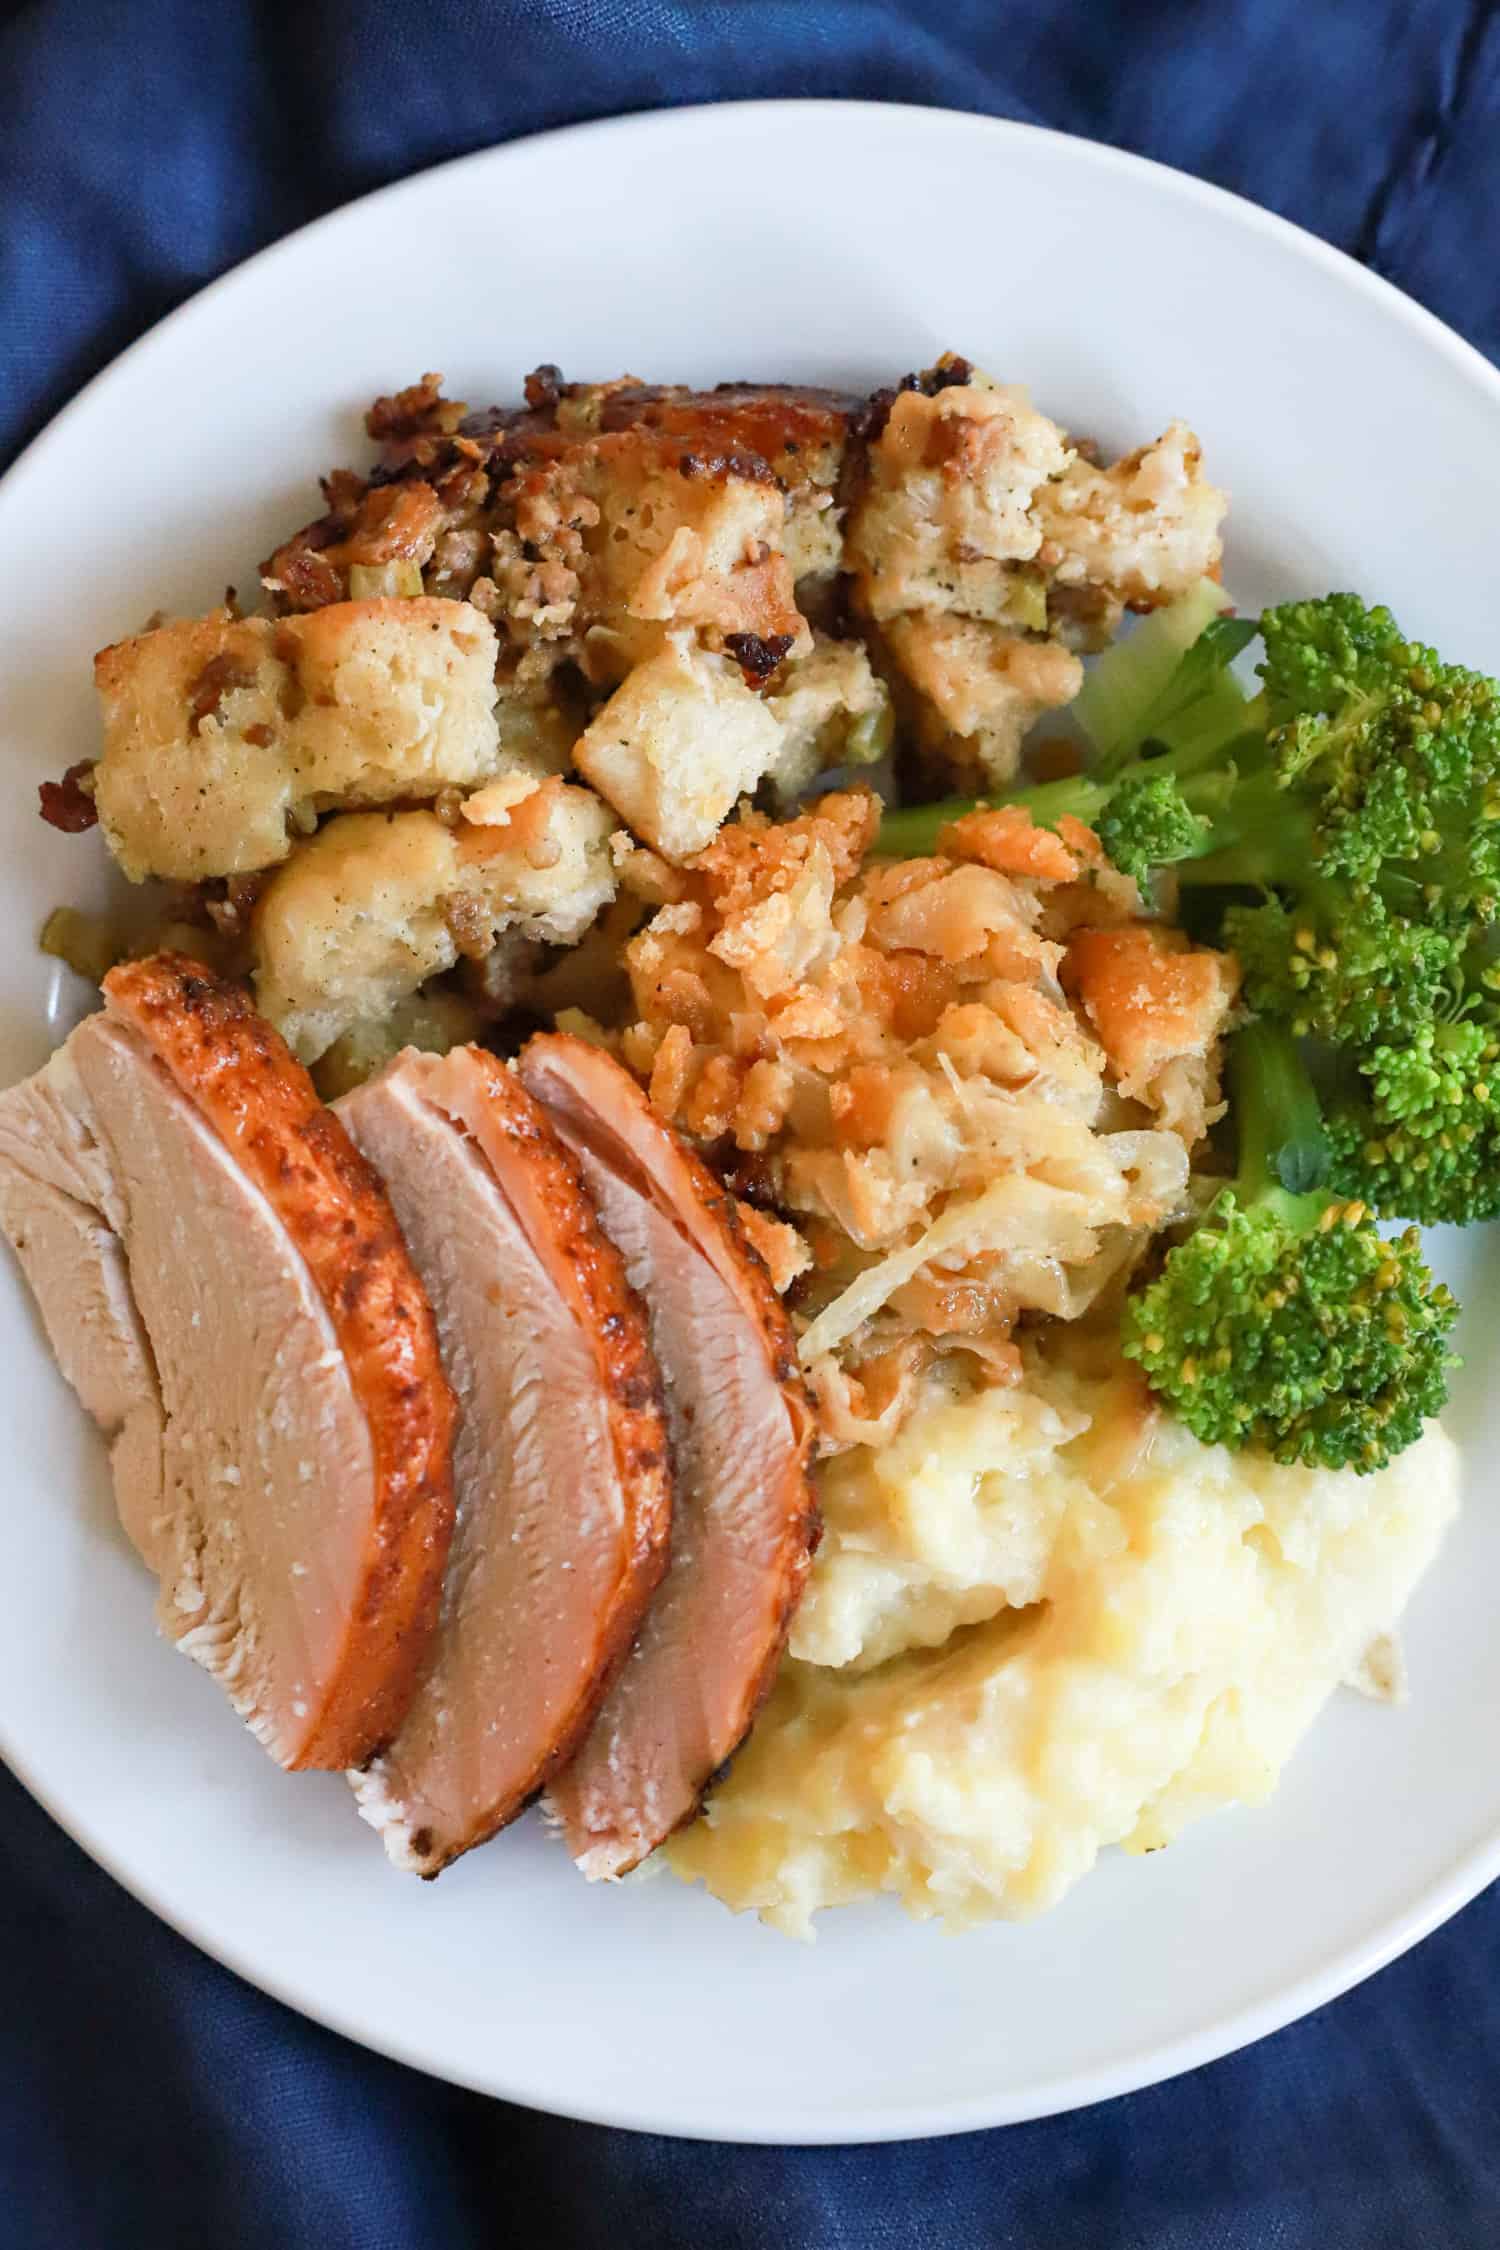 thanksgiving plate with stuffing, onion casserole, broccoli, and sliced turkey.